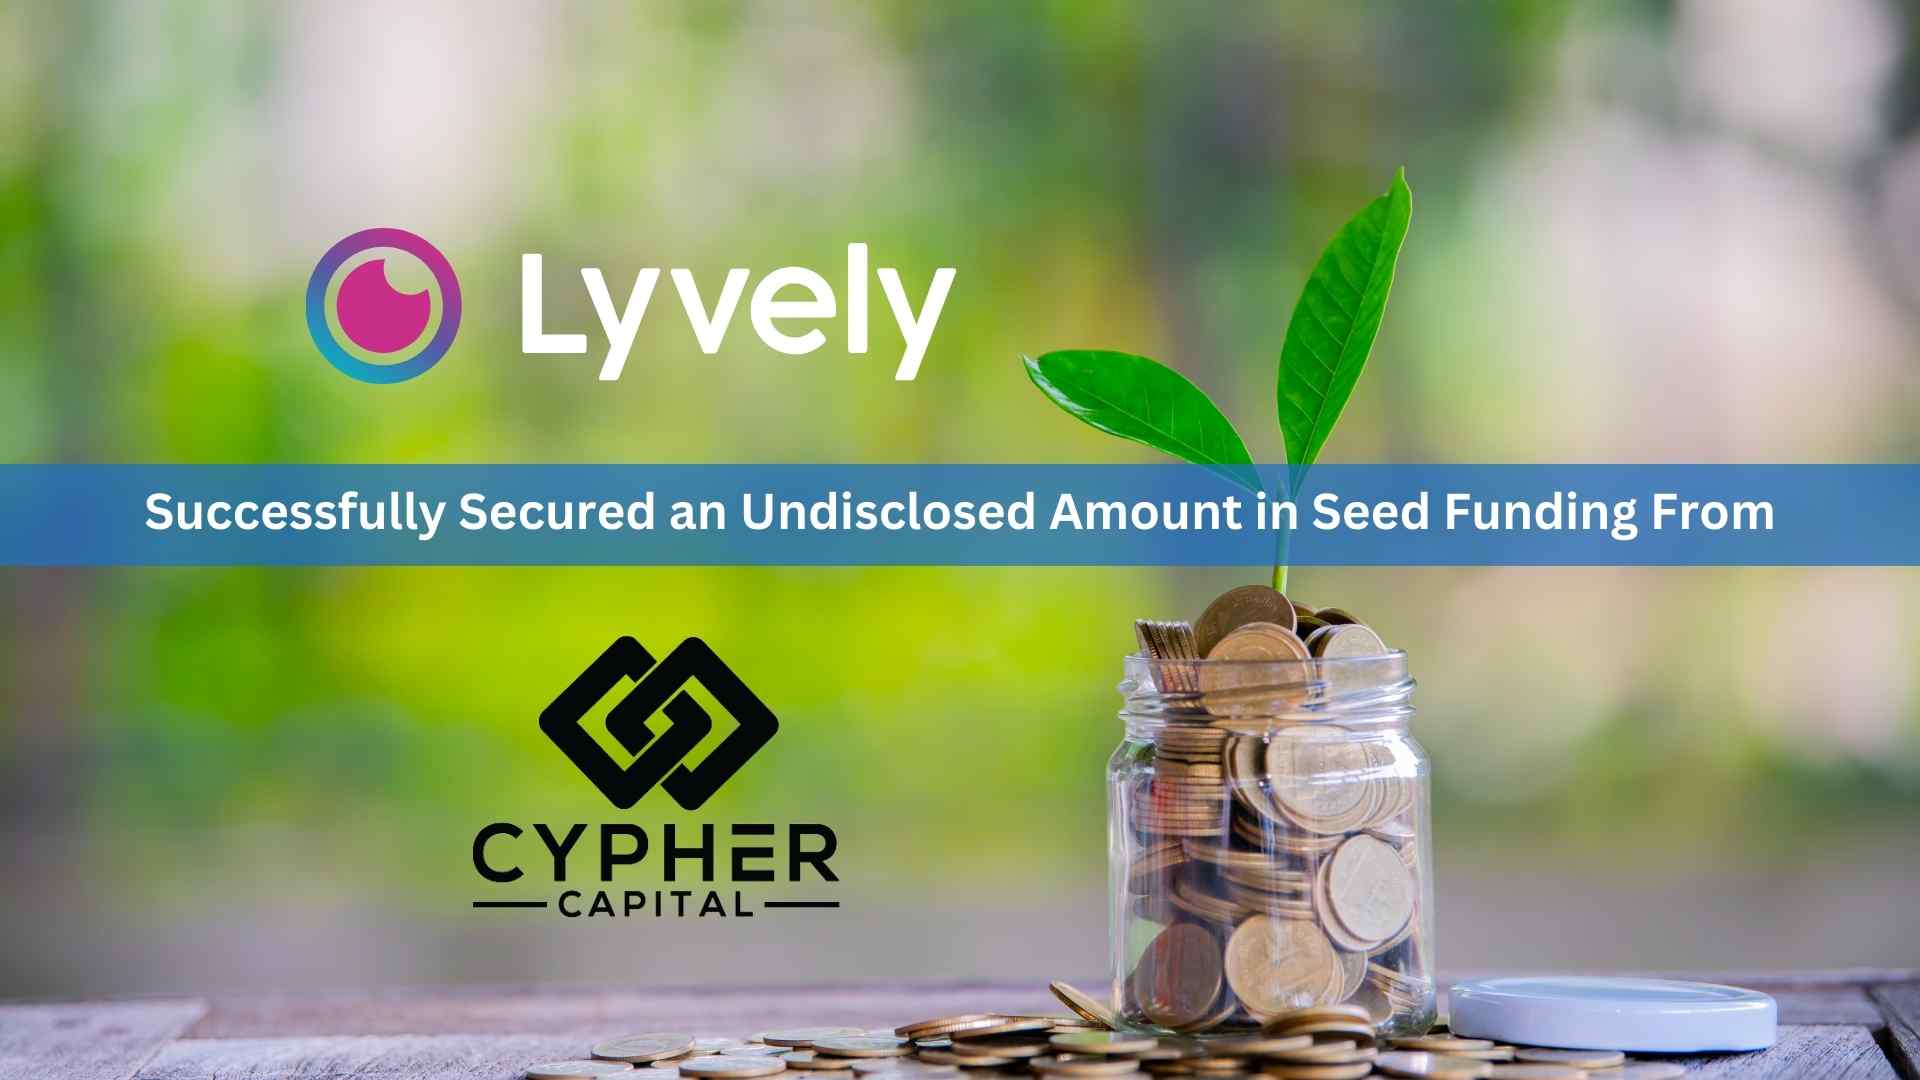 Lyvely, the Disruptive Social Network, Secures Investment from Cypher Capital